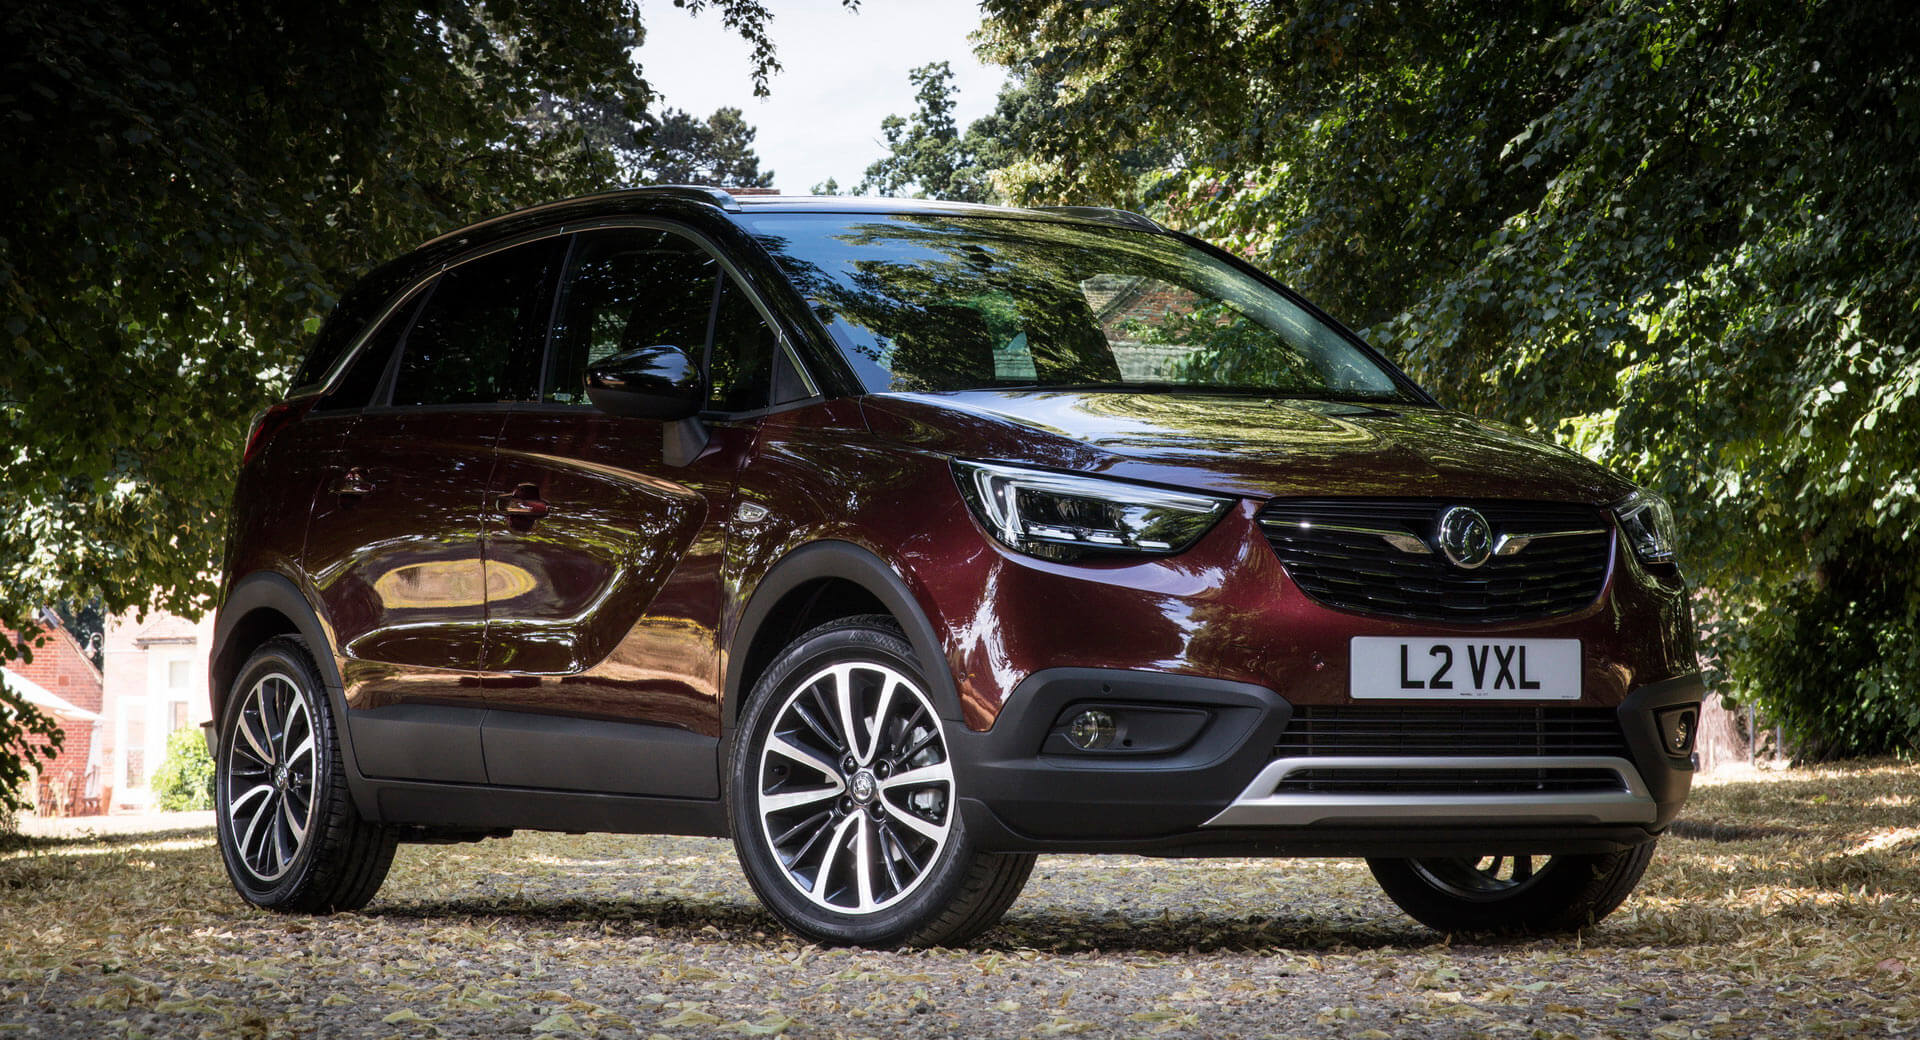 Vauxhall Prices Crossland X Ultimate Flagship From £22,480 OTR